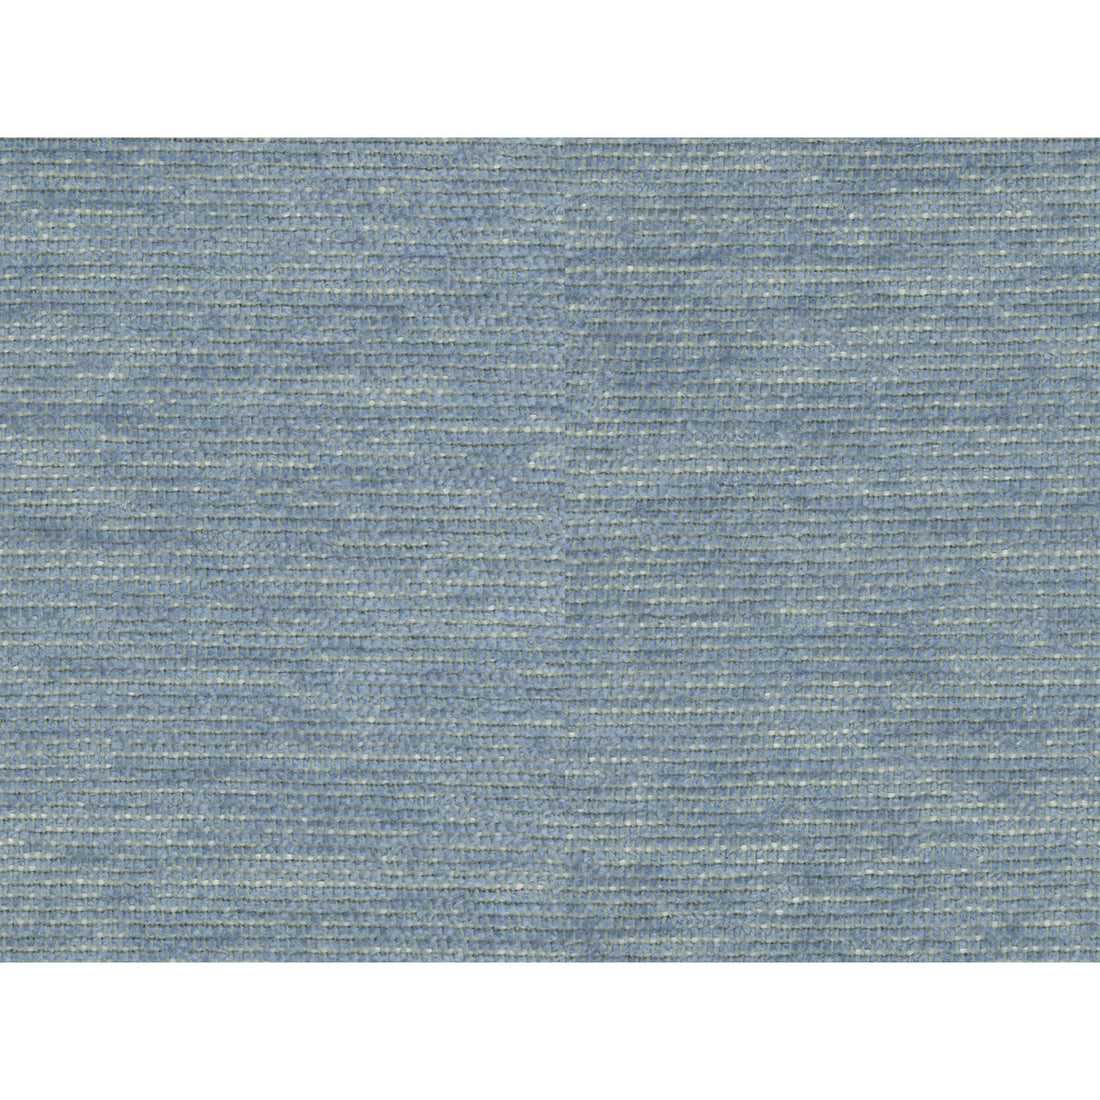 Revard Chenille fabric in sky blue color - pattern 8016107.15.0 - by Brunschwig &amp; Fils in the Chambery Textures collection